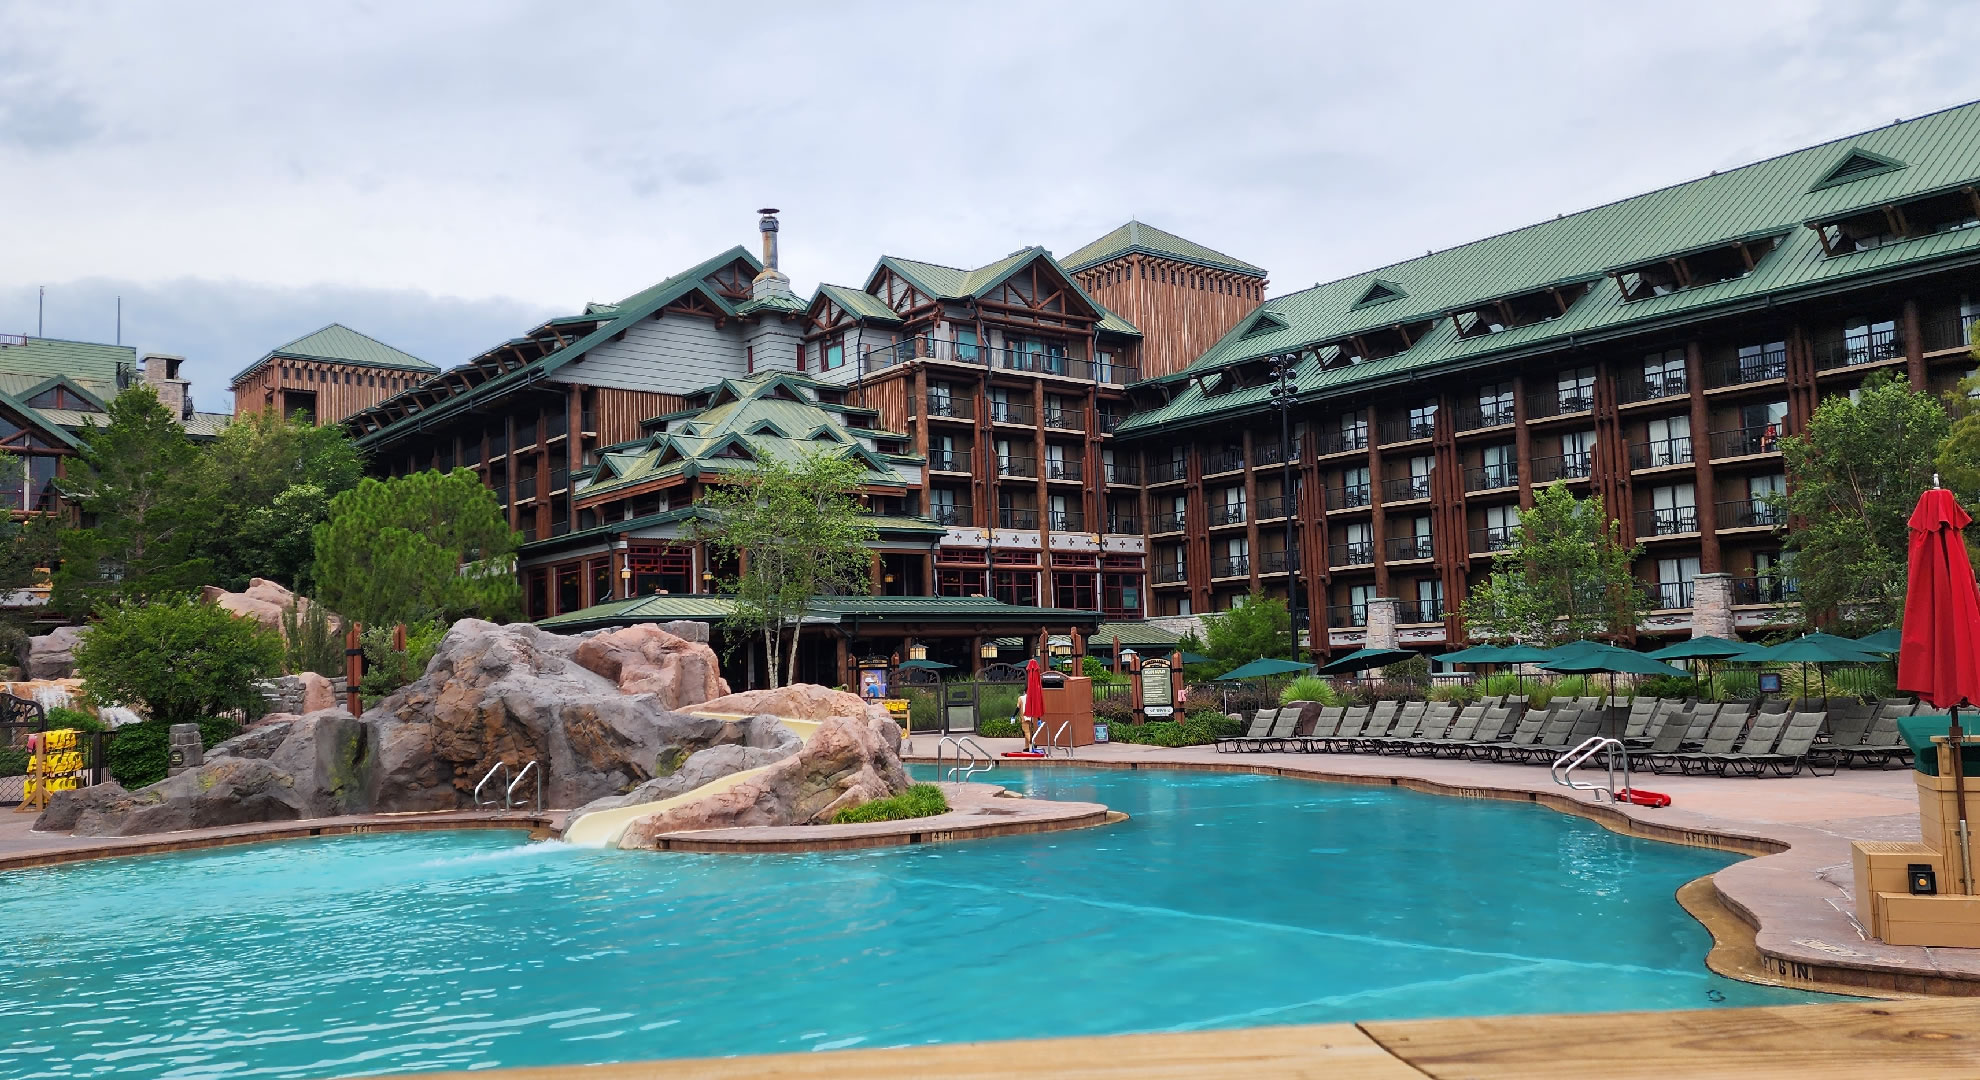 Copper Creek Springs Pool at Disney’s Wilderness Lodge. The log cabin-esque building with green accents can be seen in the background of the photo. A waterslide surrounded by fake rocks flows into the pool.